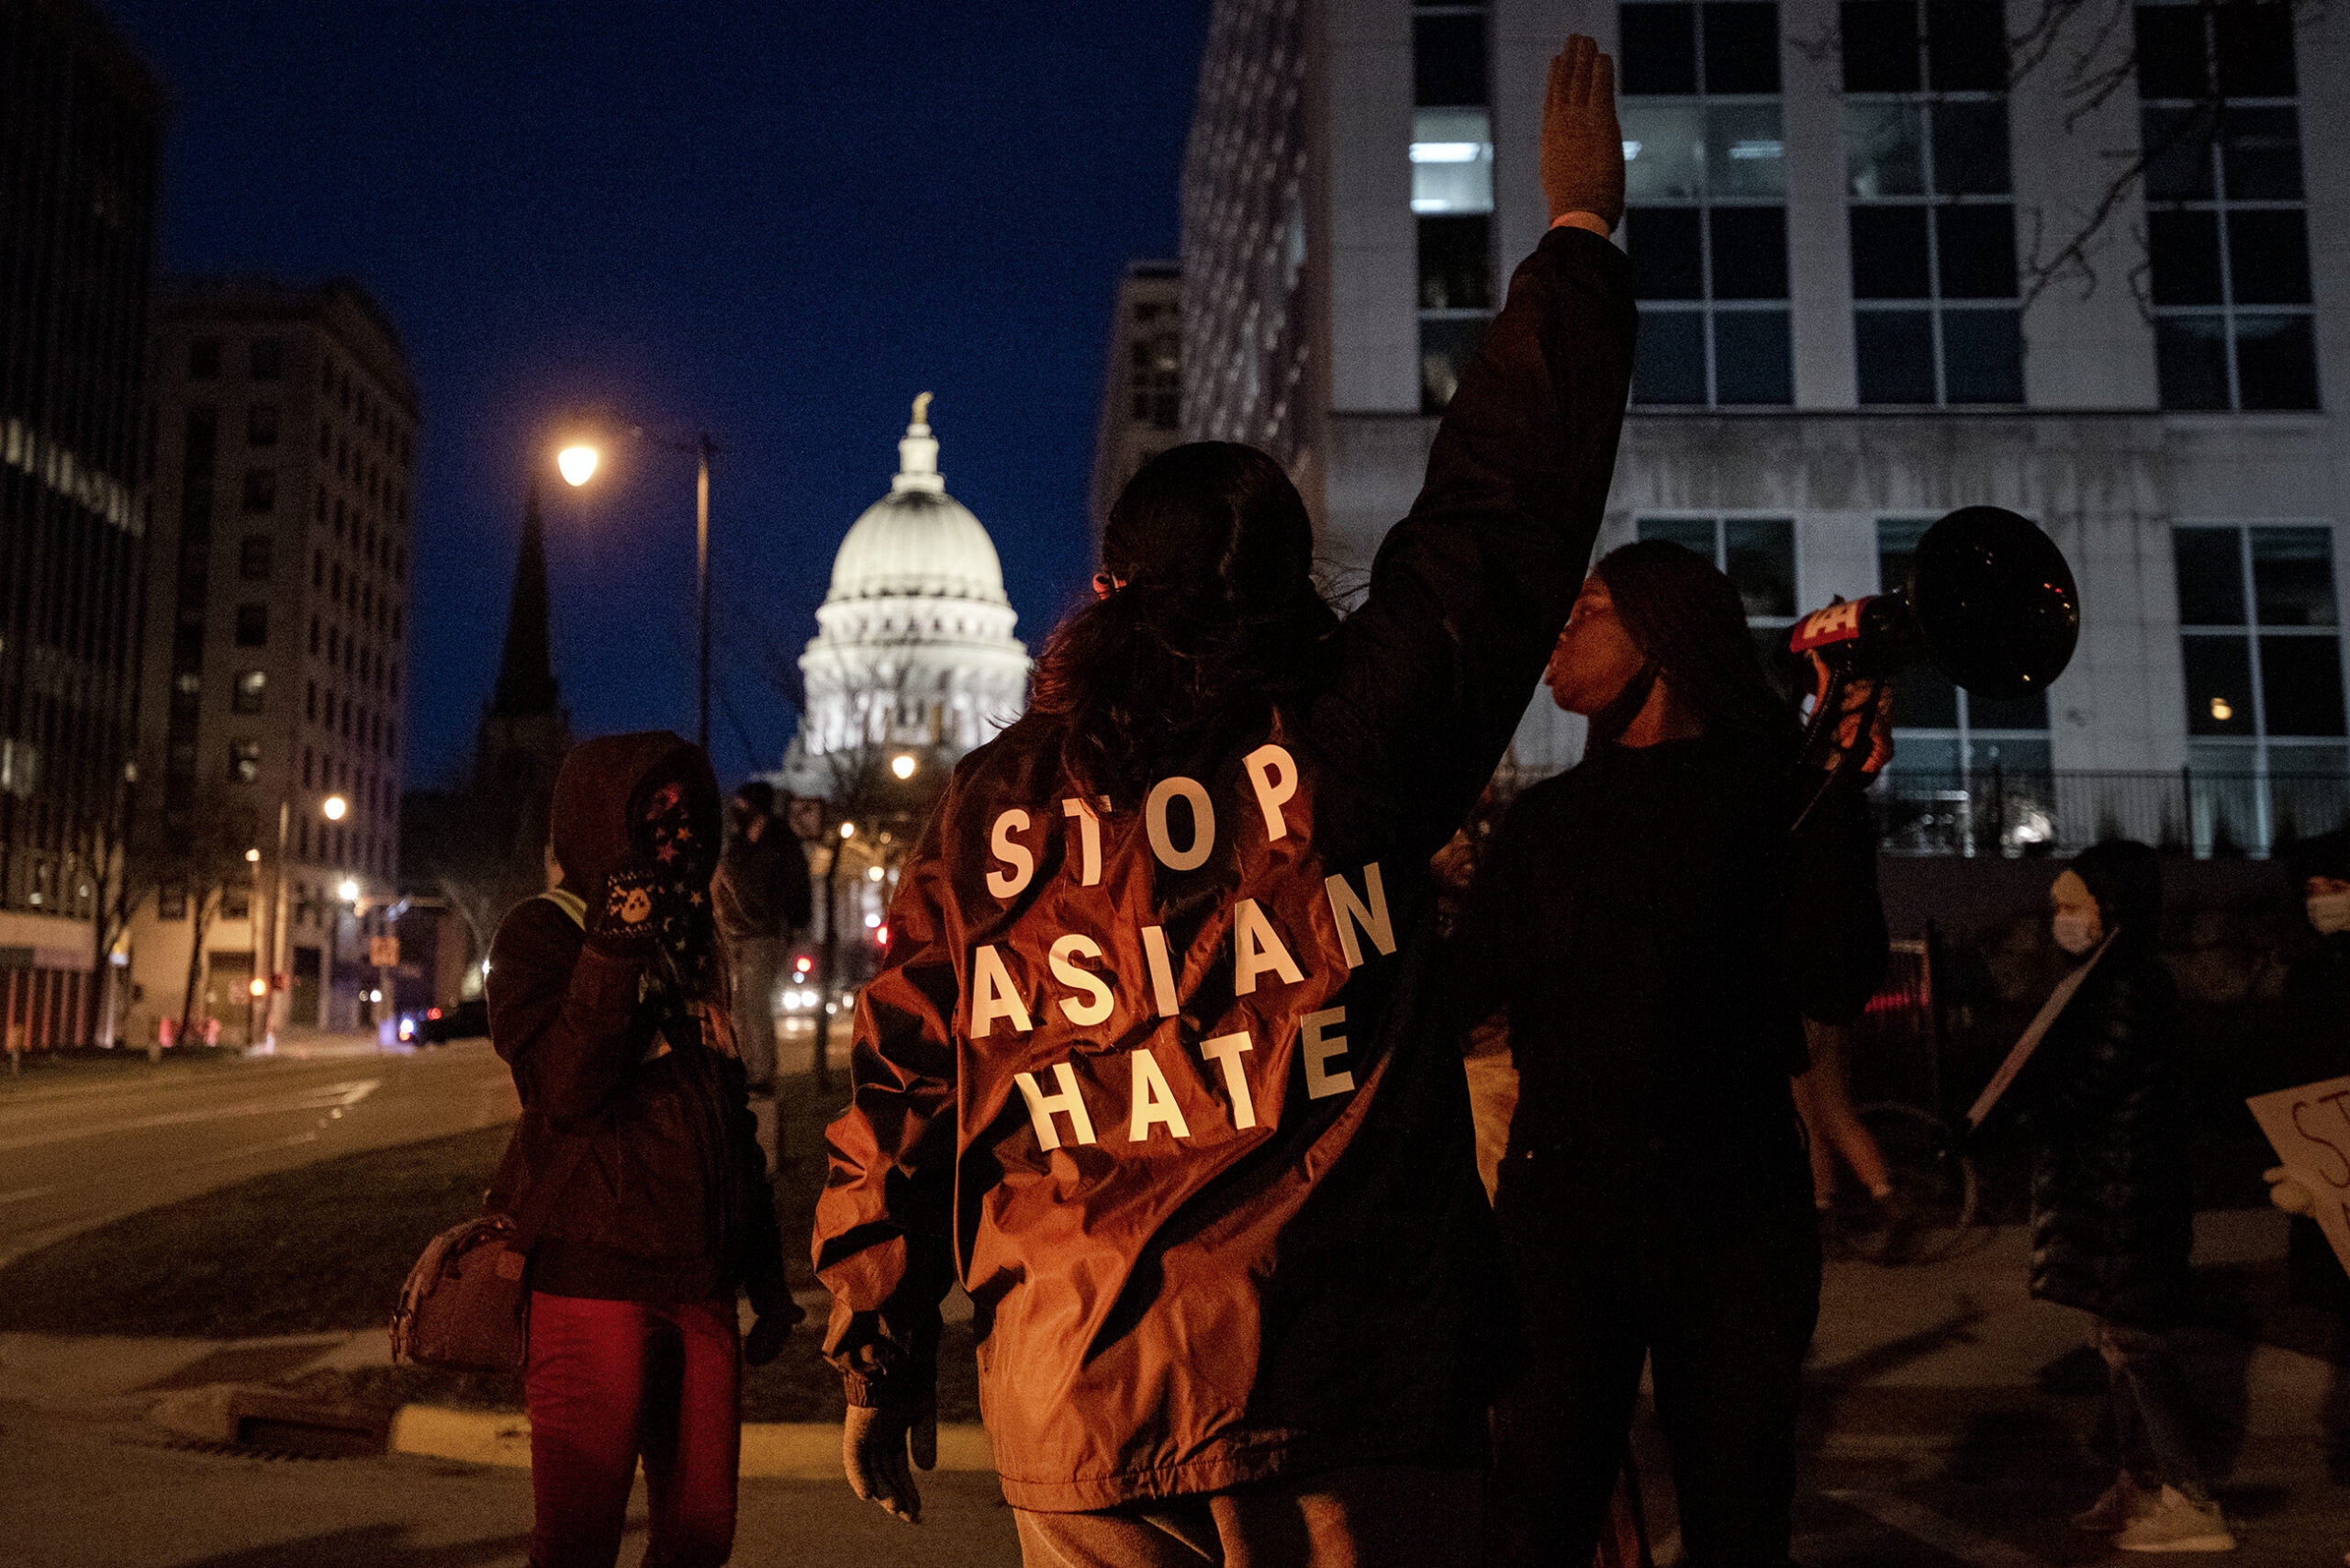 "STOP ASIAN HATE" is written on the back of a protester's jacket. The Wisconsin State Capitol can be seen in the background.